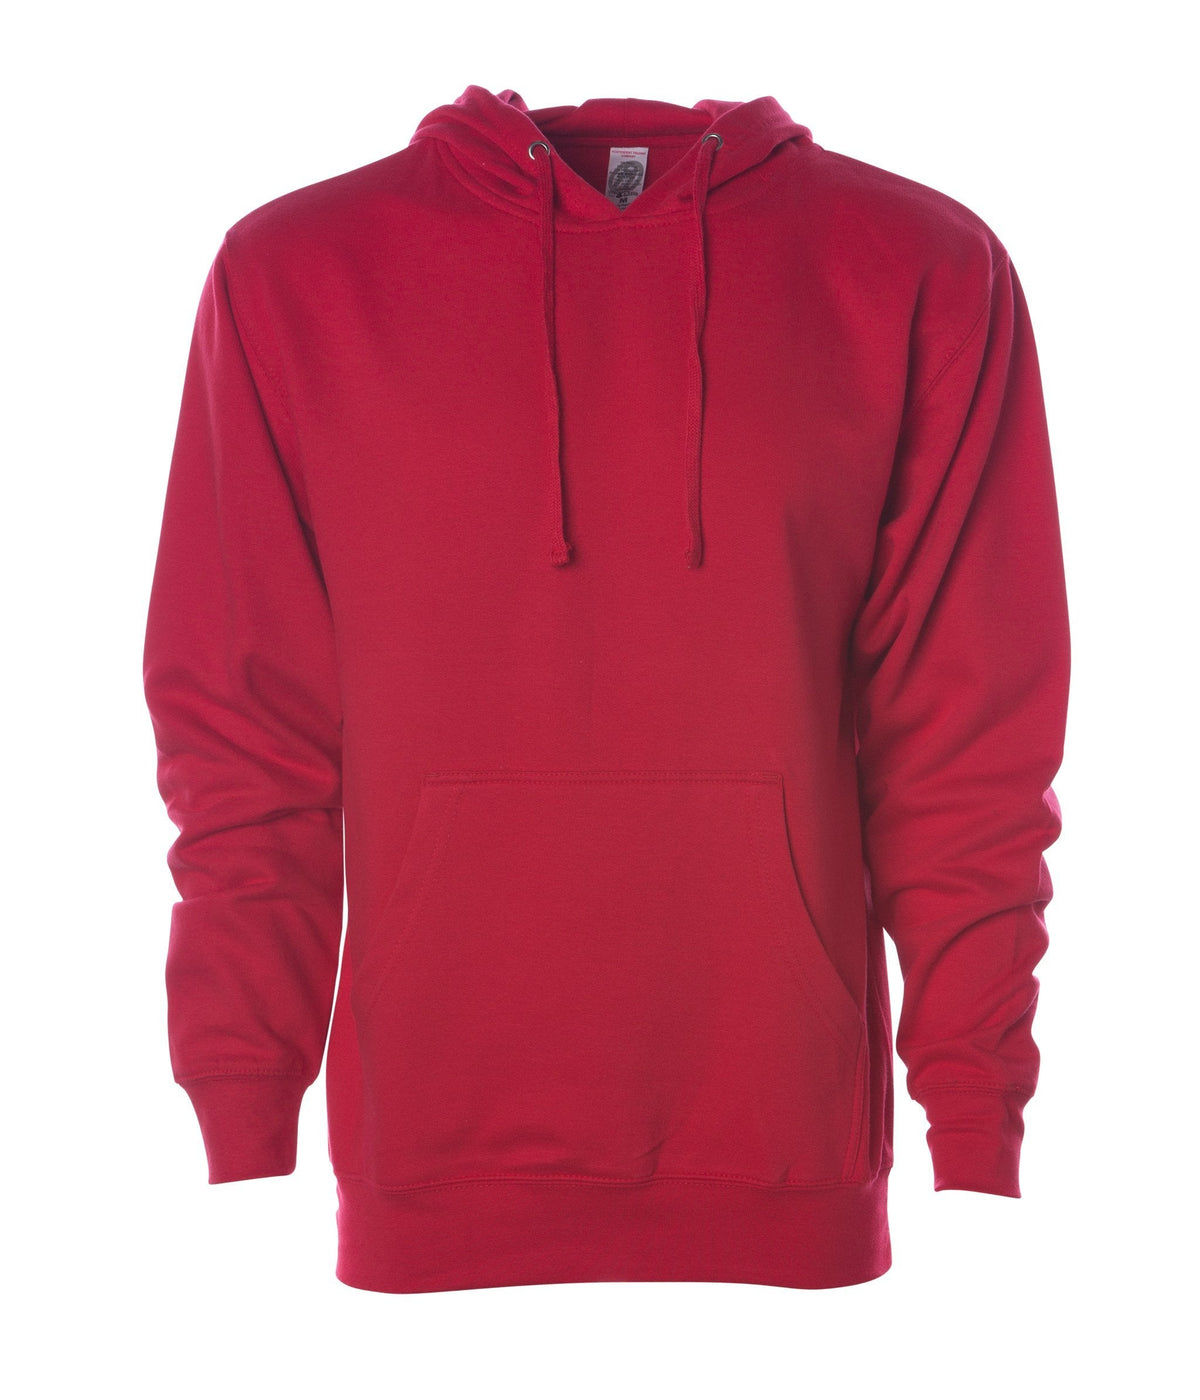 SS4500 Midweight Hooded Pullover Sweatshirt